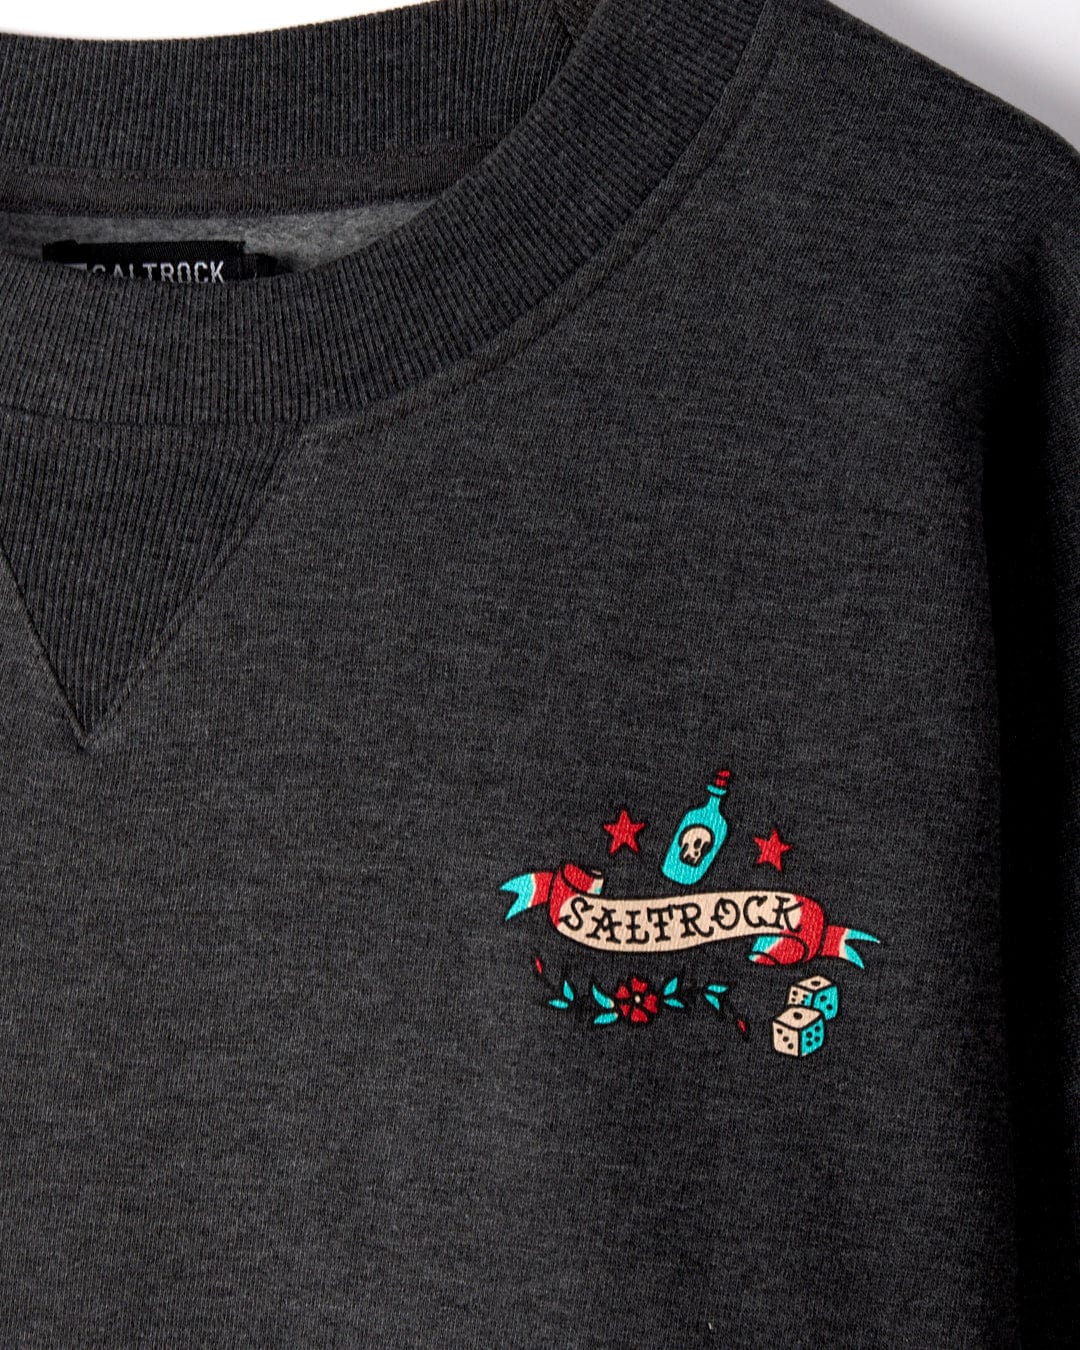 A close-up of a dark grey **Sea Siren - Mens Sweat - Dark Grey** with a colorful **Saltrock** logo featuring a bottle, dice, and flowers embroidered on the chest, showcasing an oversized fit.